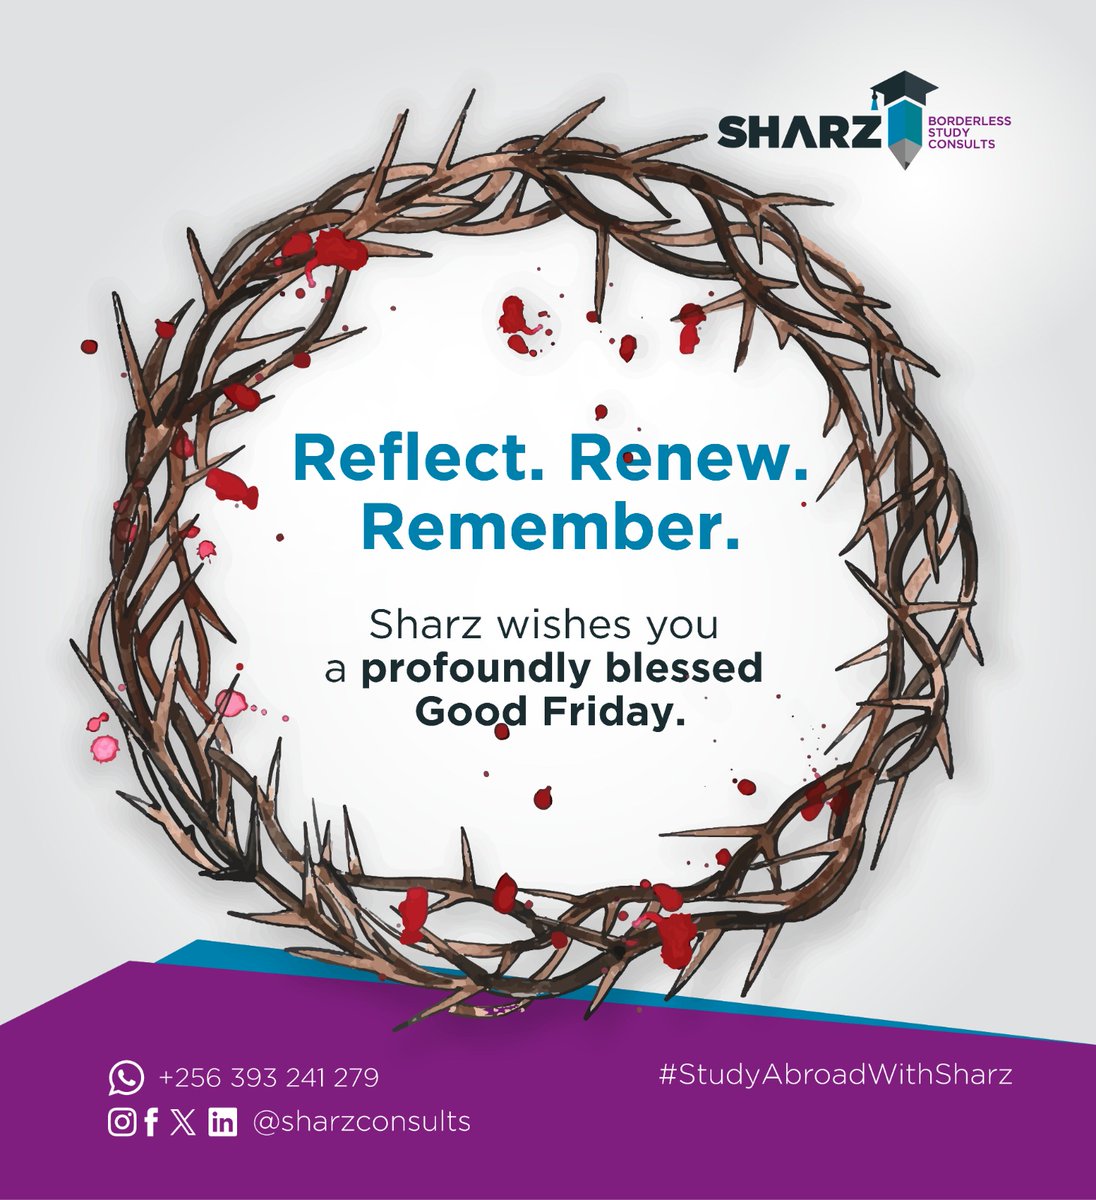 Reflecting on #GoodFriday: Embrace Jesus' love, spread compassion far and wide!